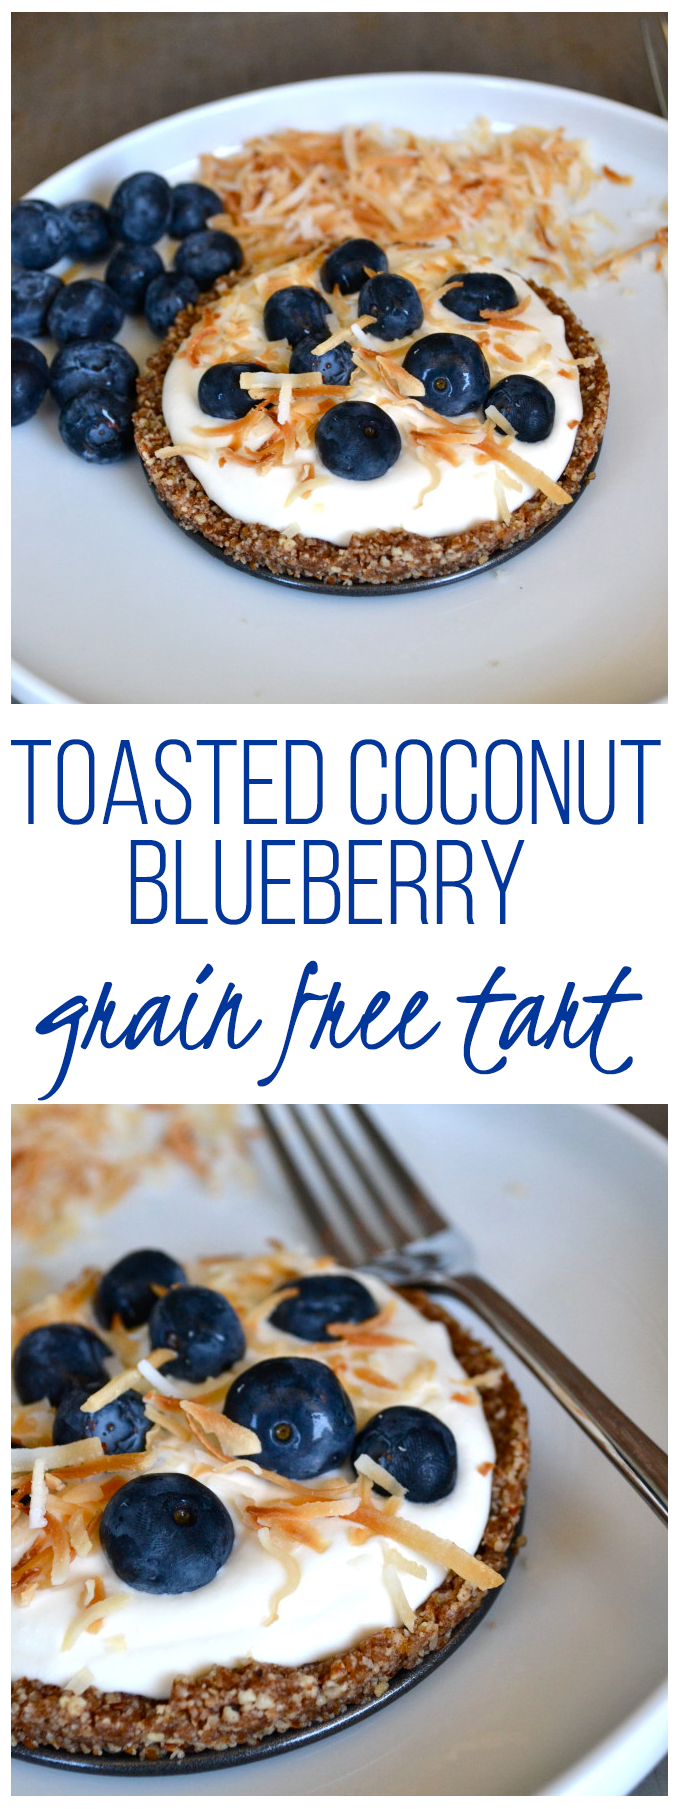 This Toasted Coconut Blueberry Grain Free Tart - a healthy gluten free dessert!